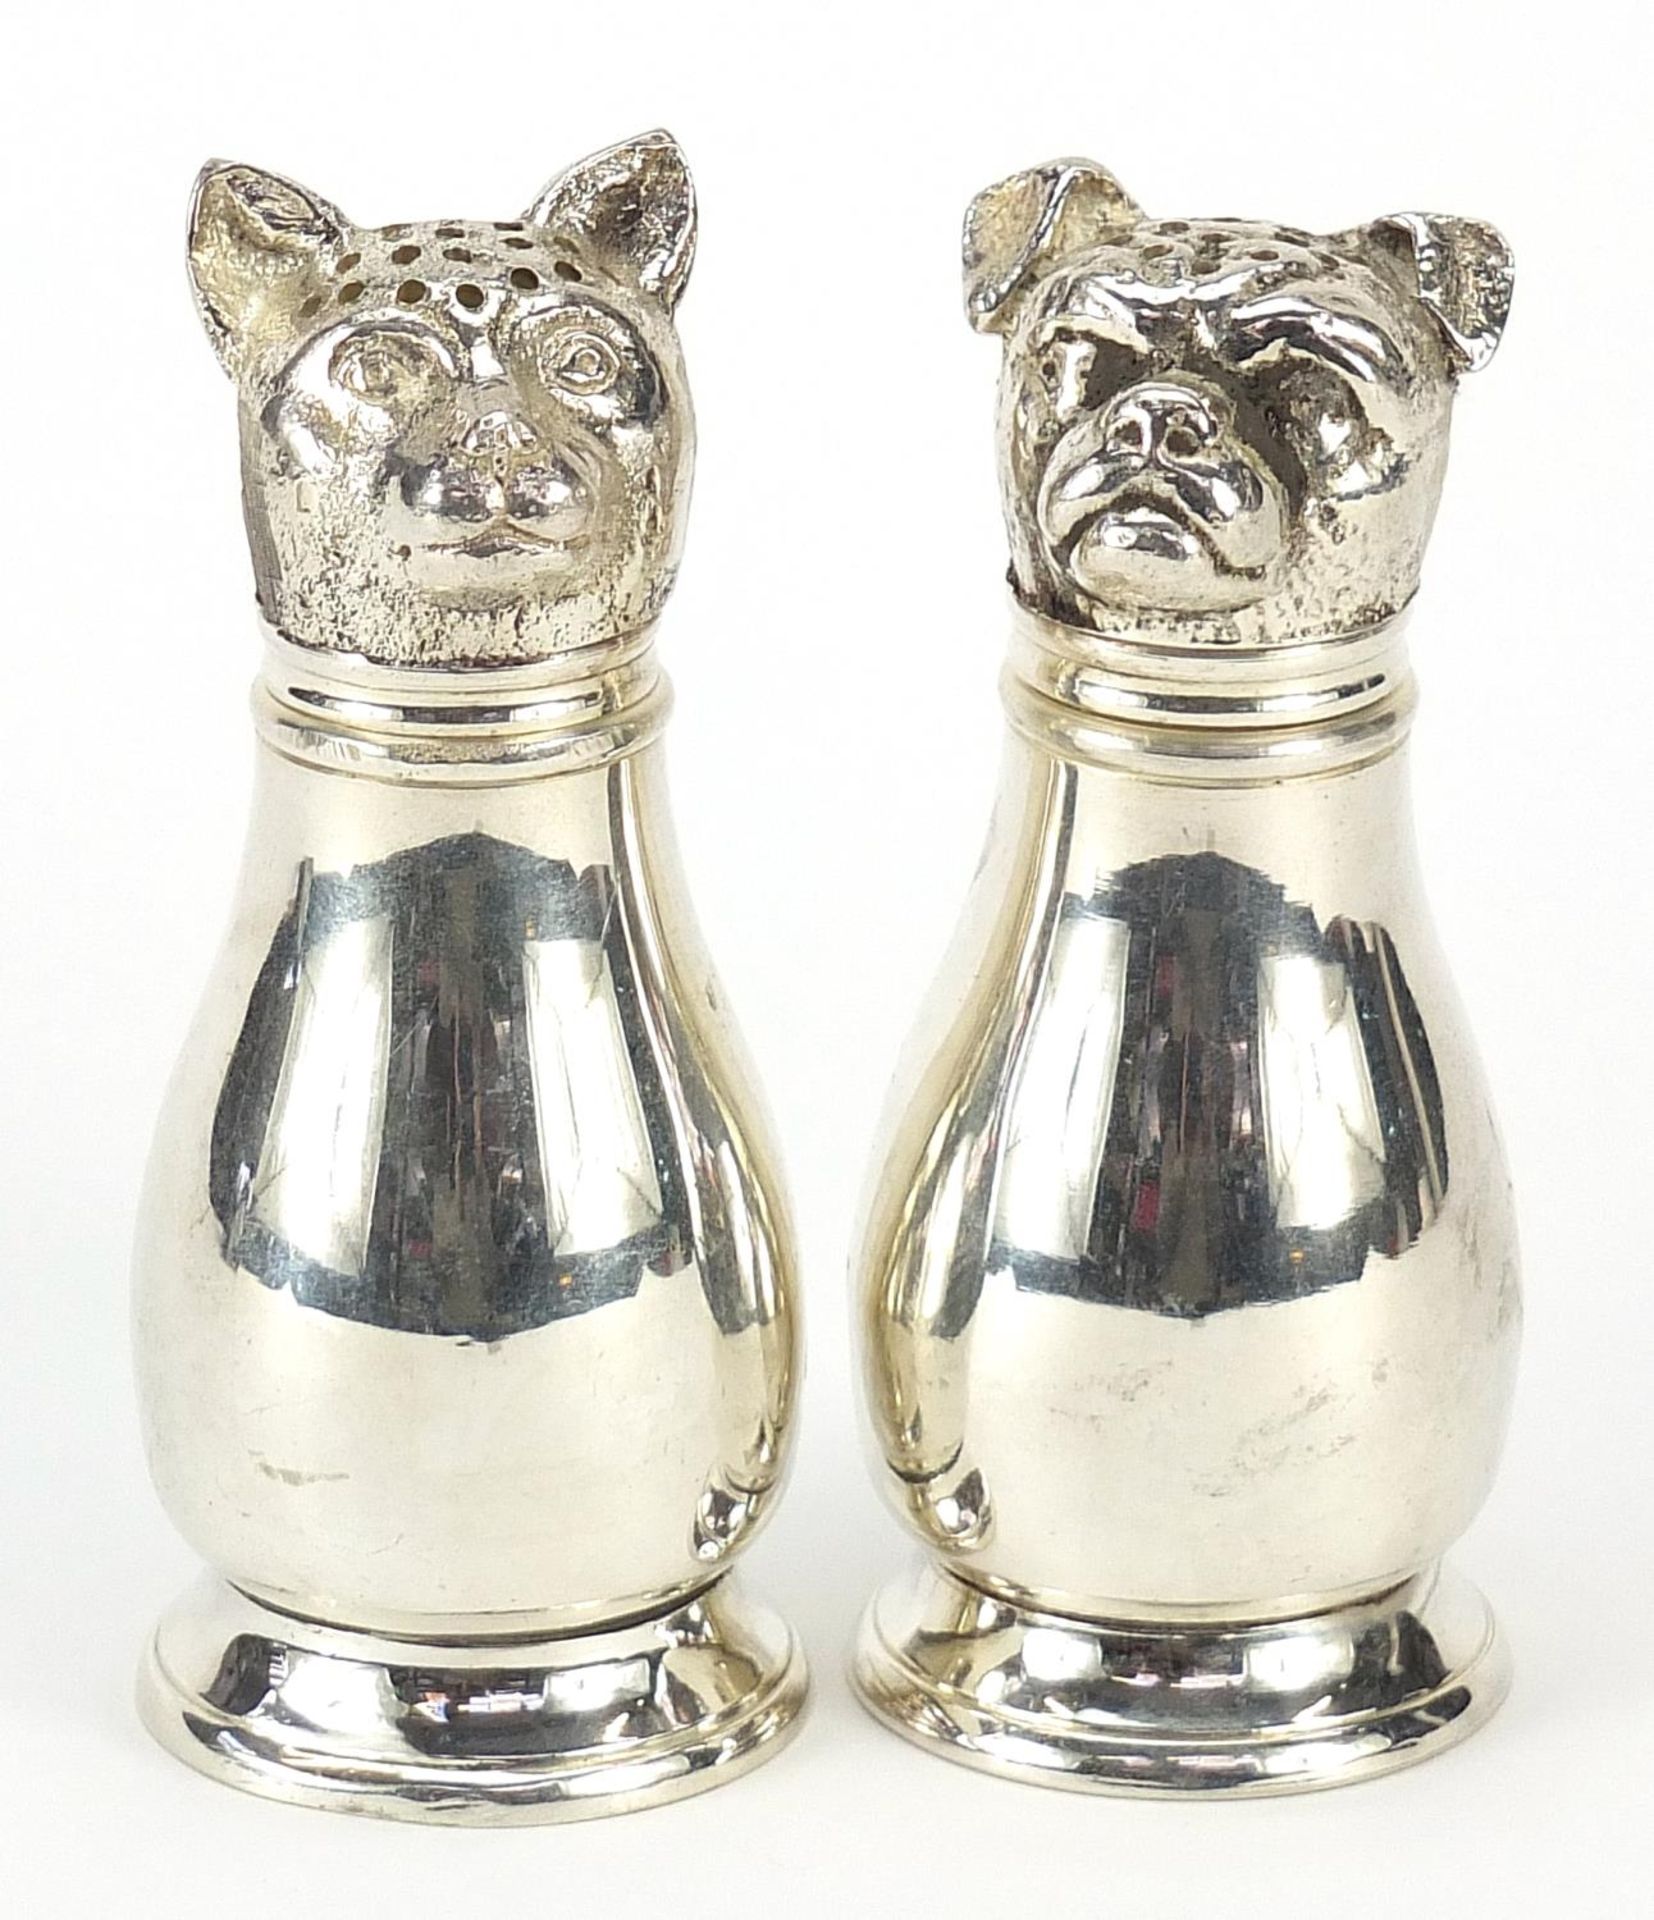 Pair of novelty silver plated cat and dog casters, 11cm high